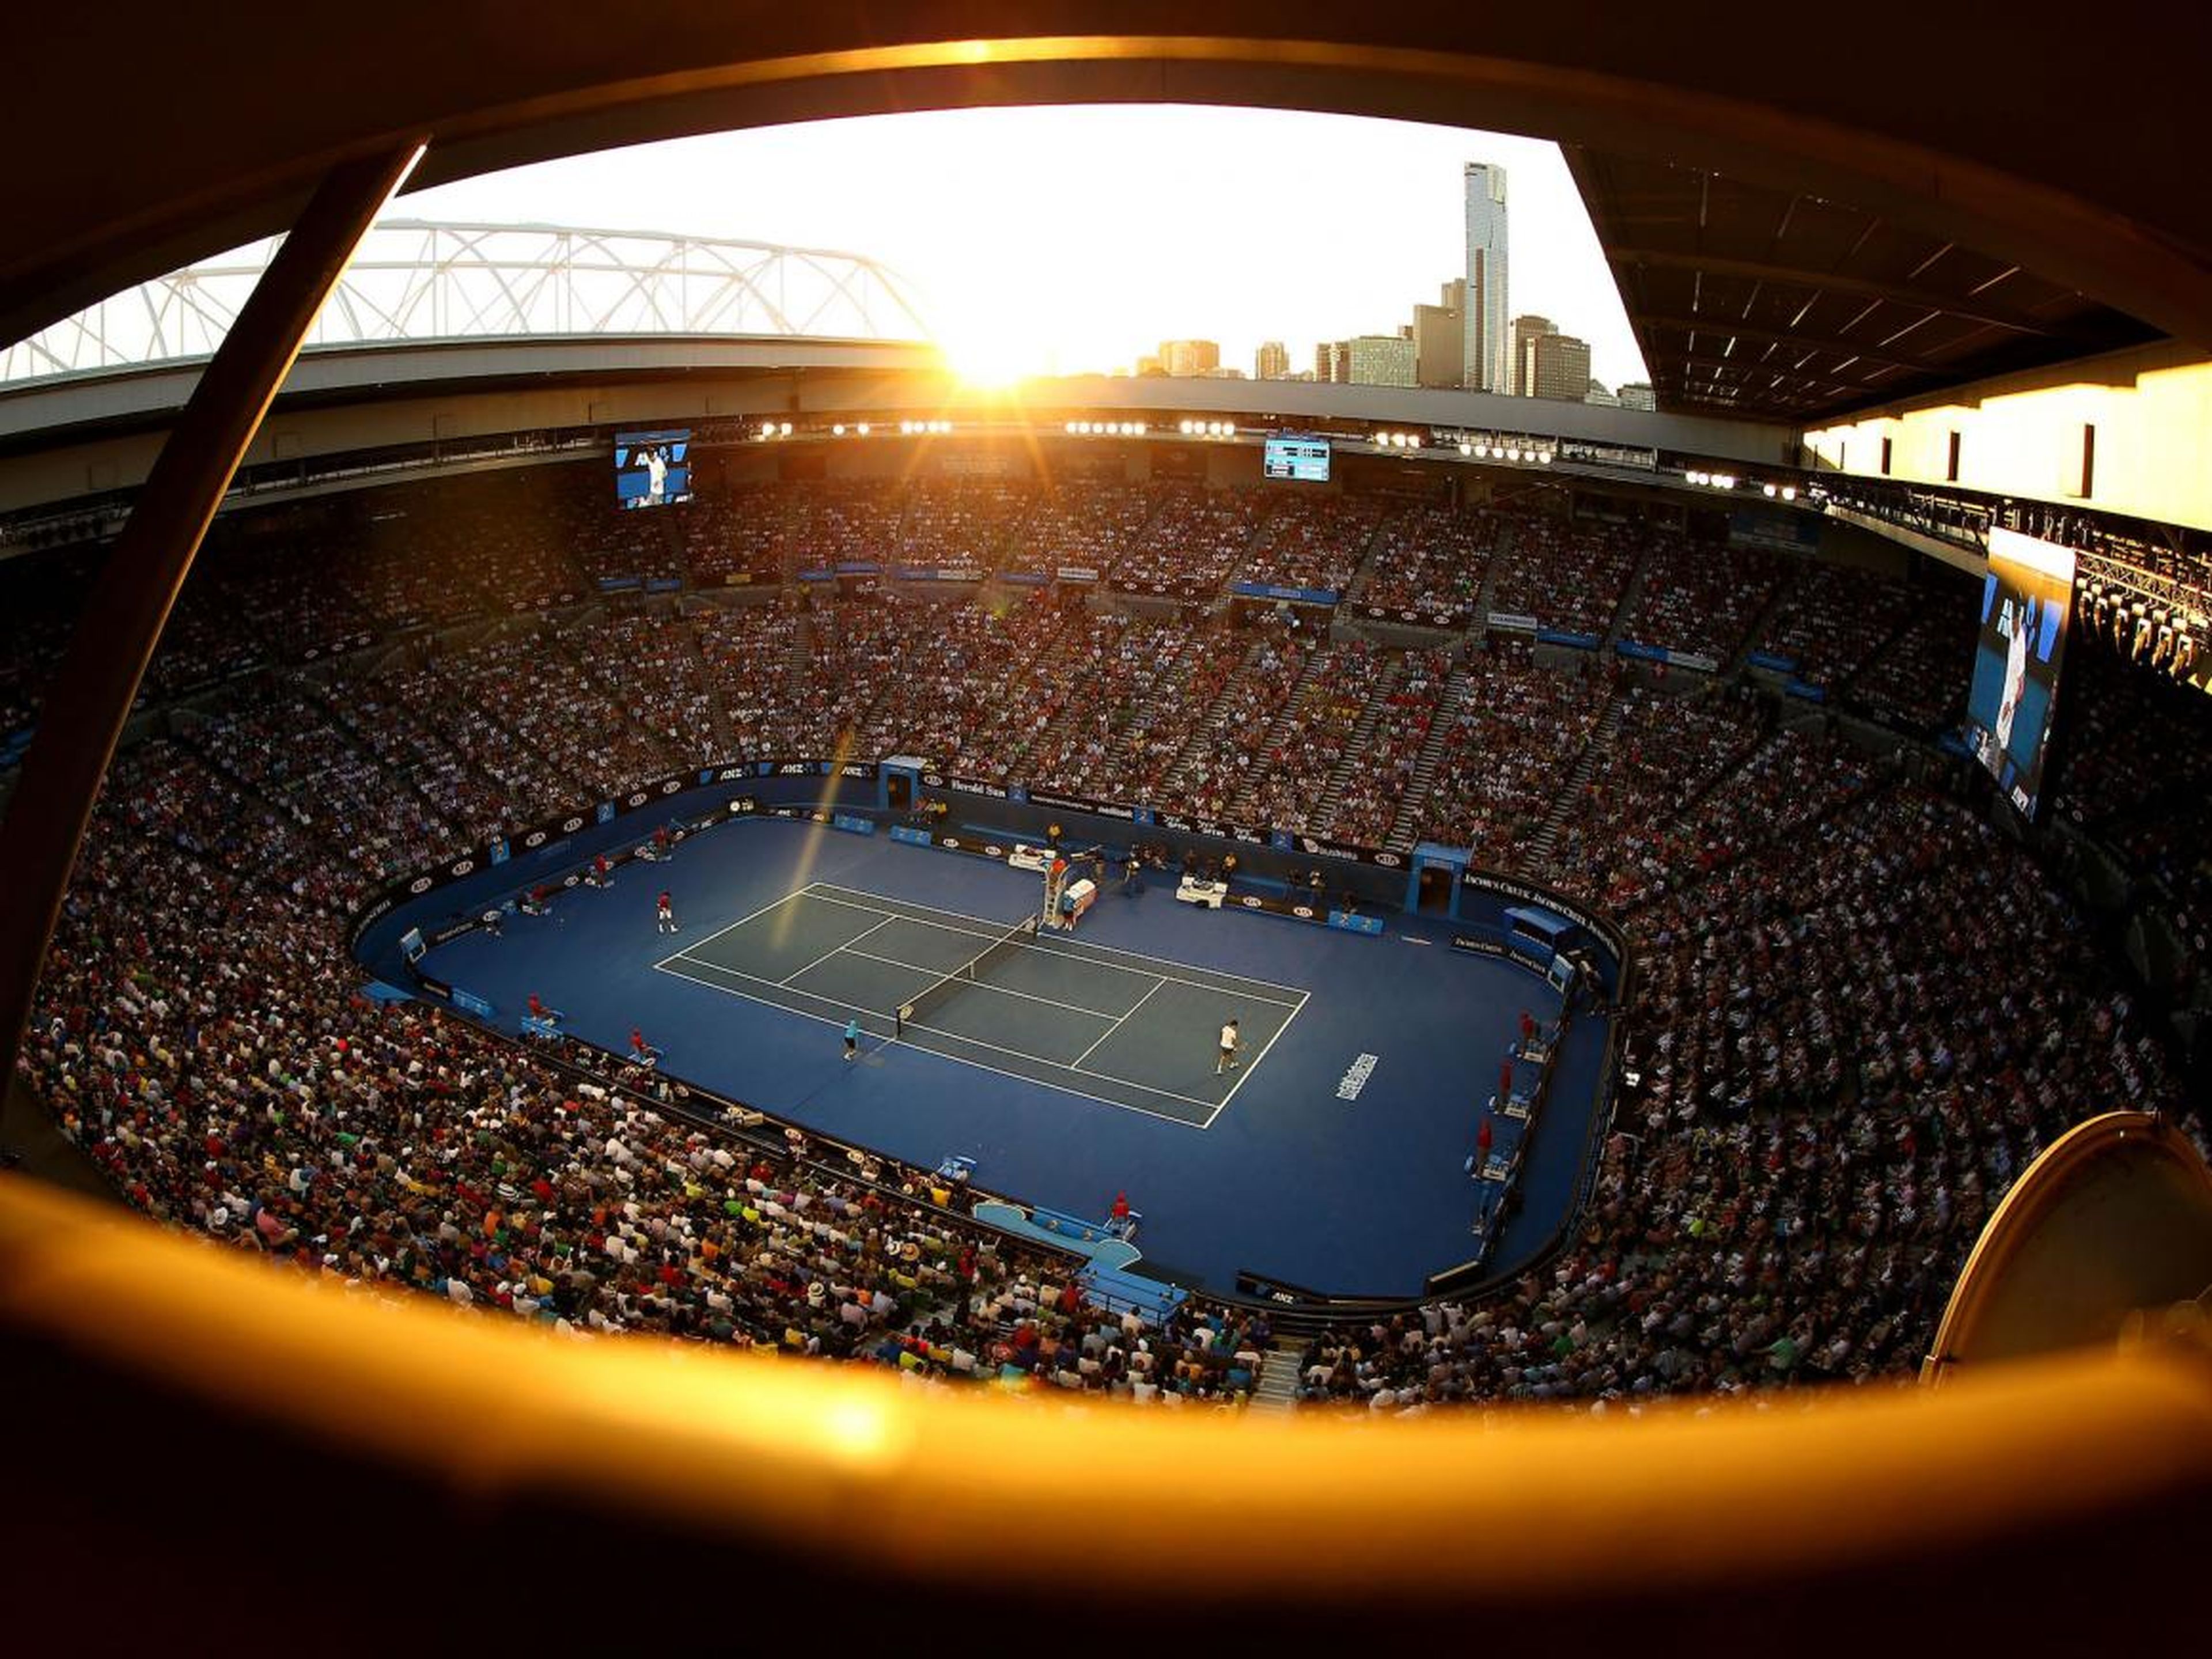 The vibe is almost peaceful as the sun sets on the Australian Open.